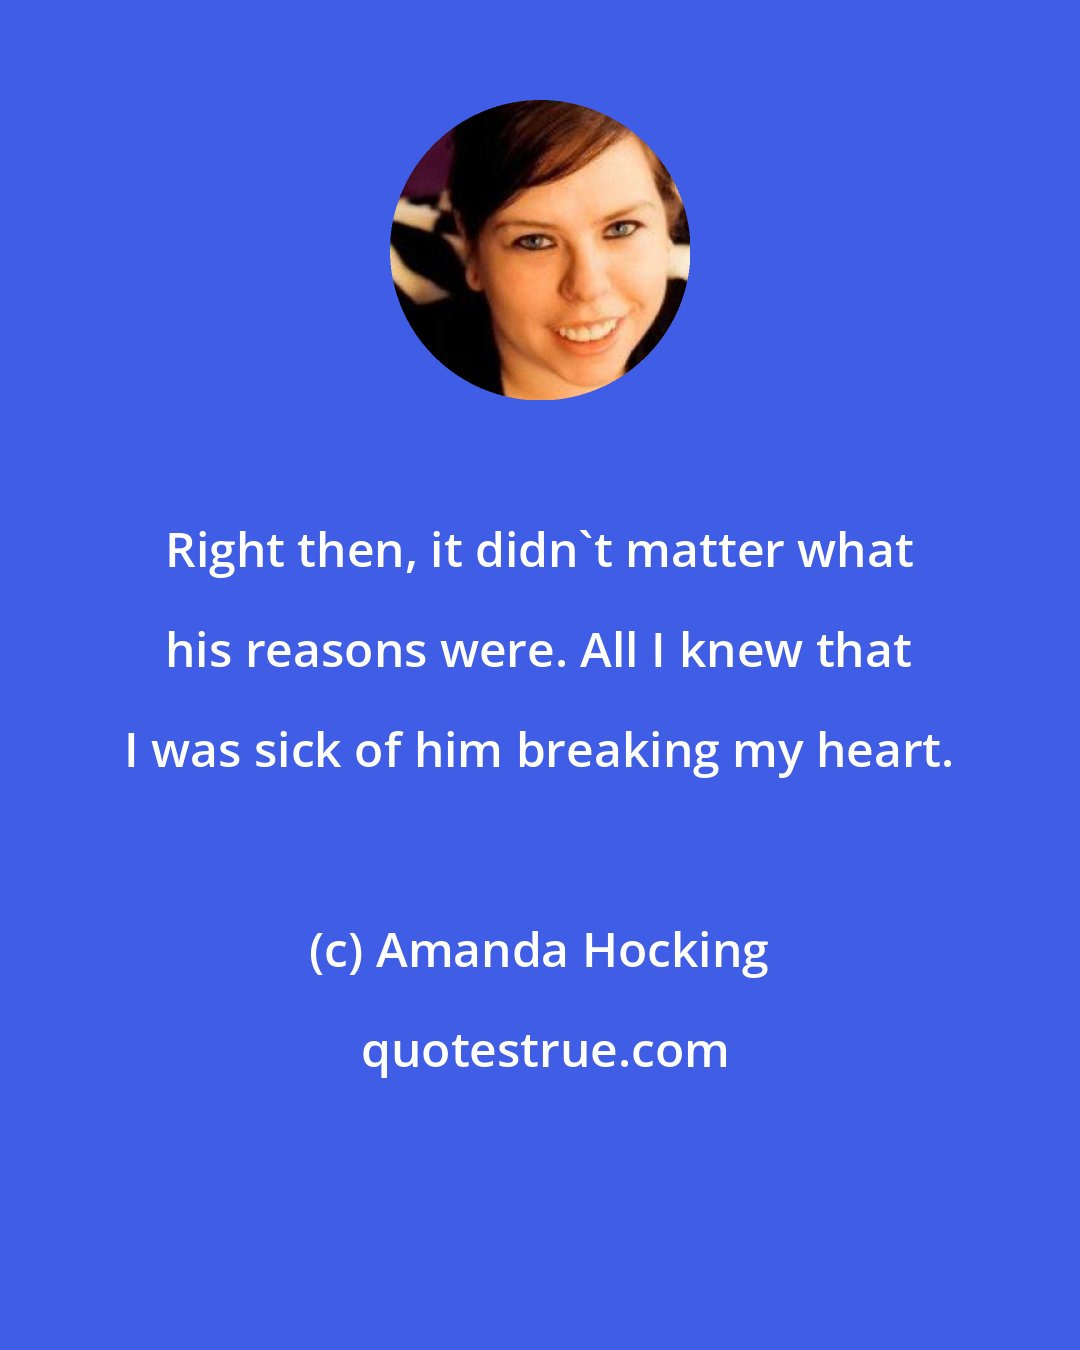 Amanda Hocking: Right then, it didn't matter what his reasons were. All I knew that I was sick of him breaking my heart.